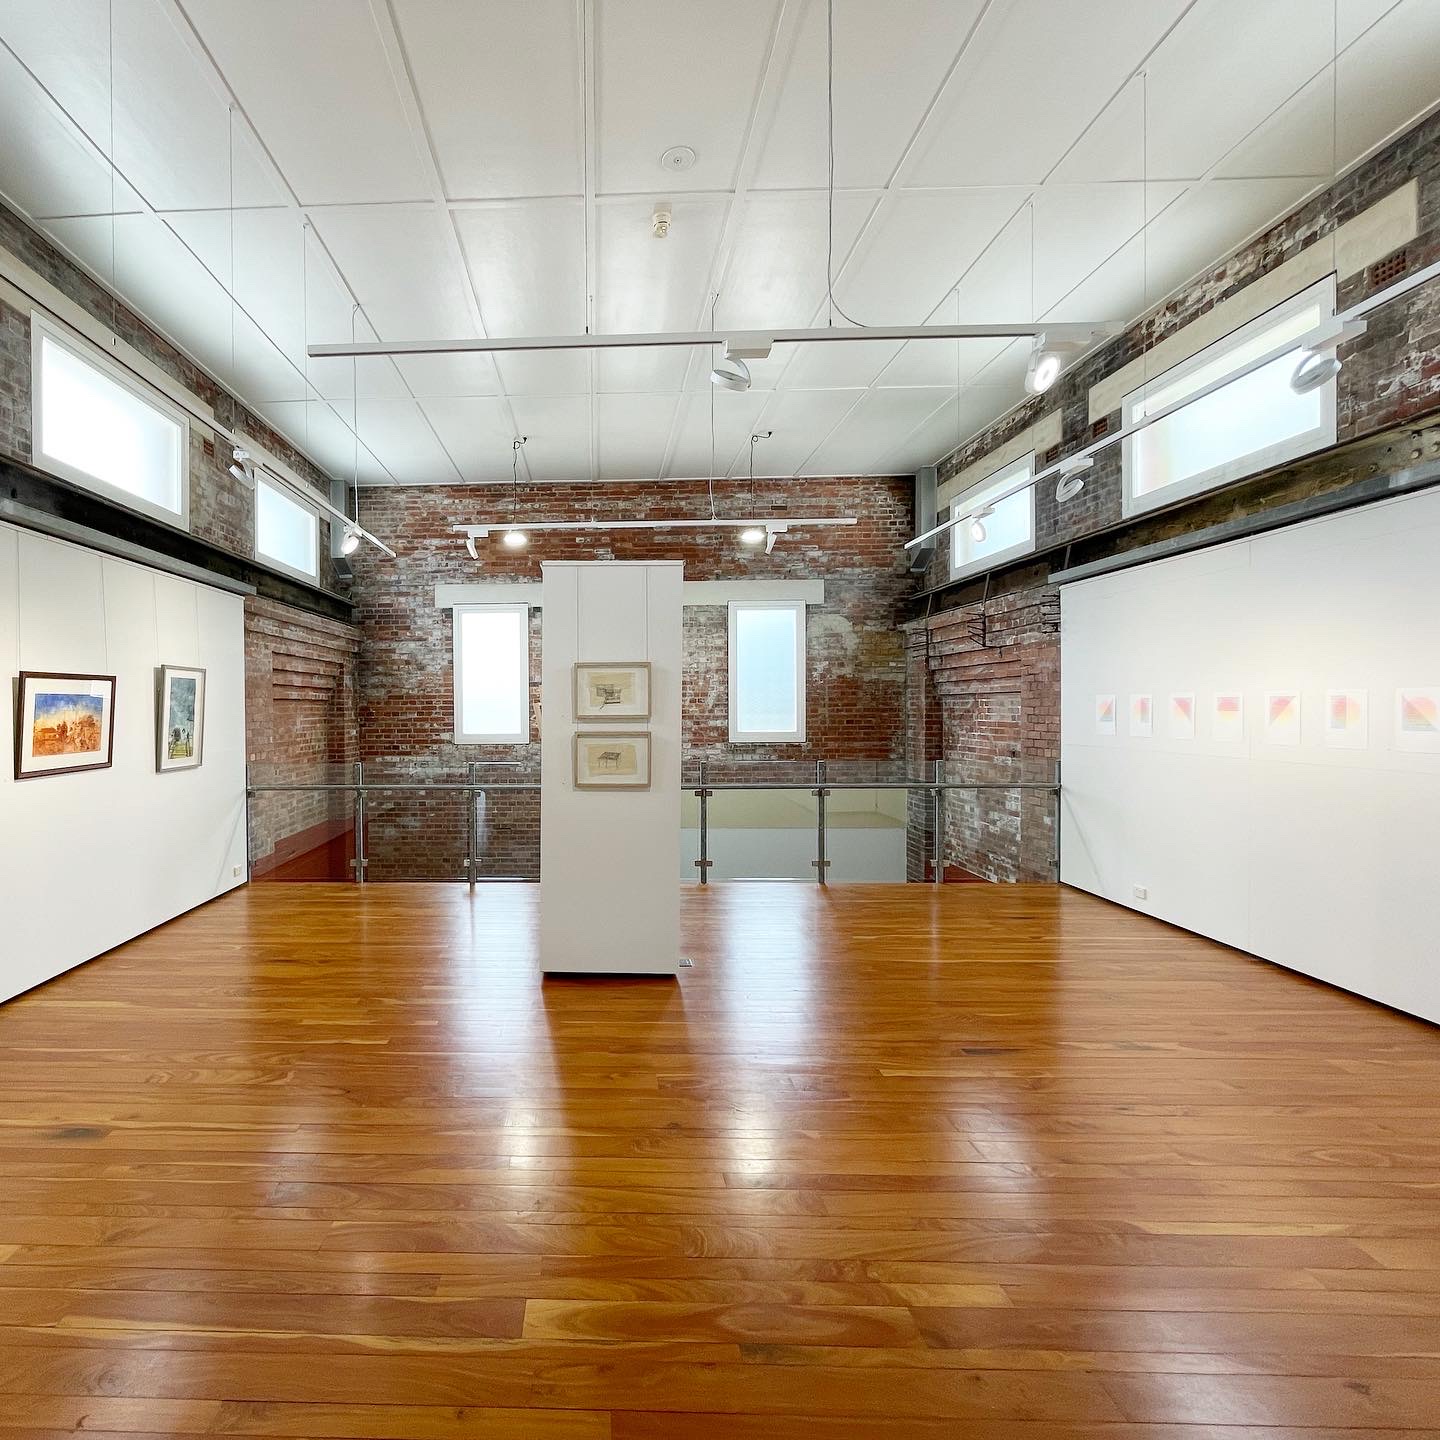 a view of the vast and vivid gallery space - the work of Domenica Hoare, Tess Mehonoshen and Lucy Rebekah is visible